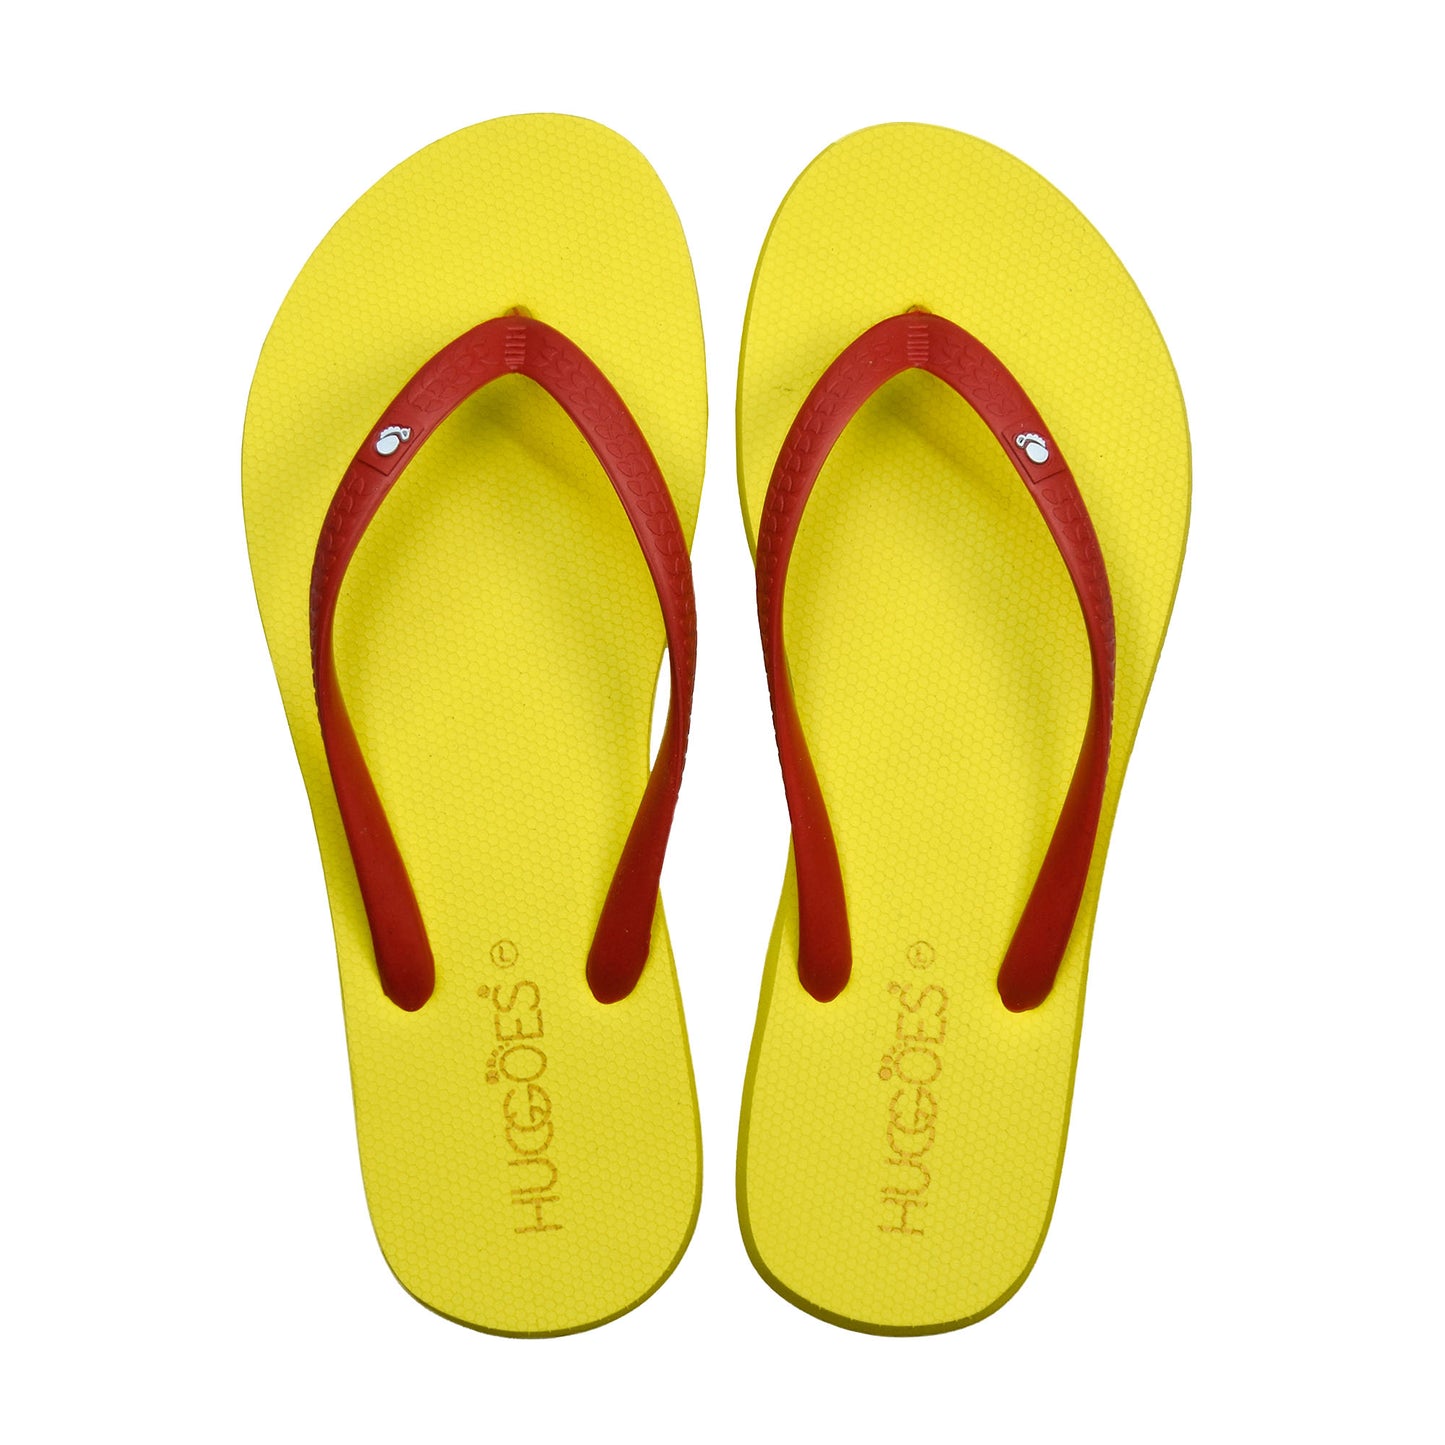 Huggoes By Aerothotic - Flambe Women's Natural Rubber Summer Flip-Flops - Original Thailand Imported - (YL1)